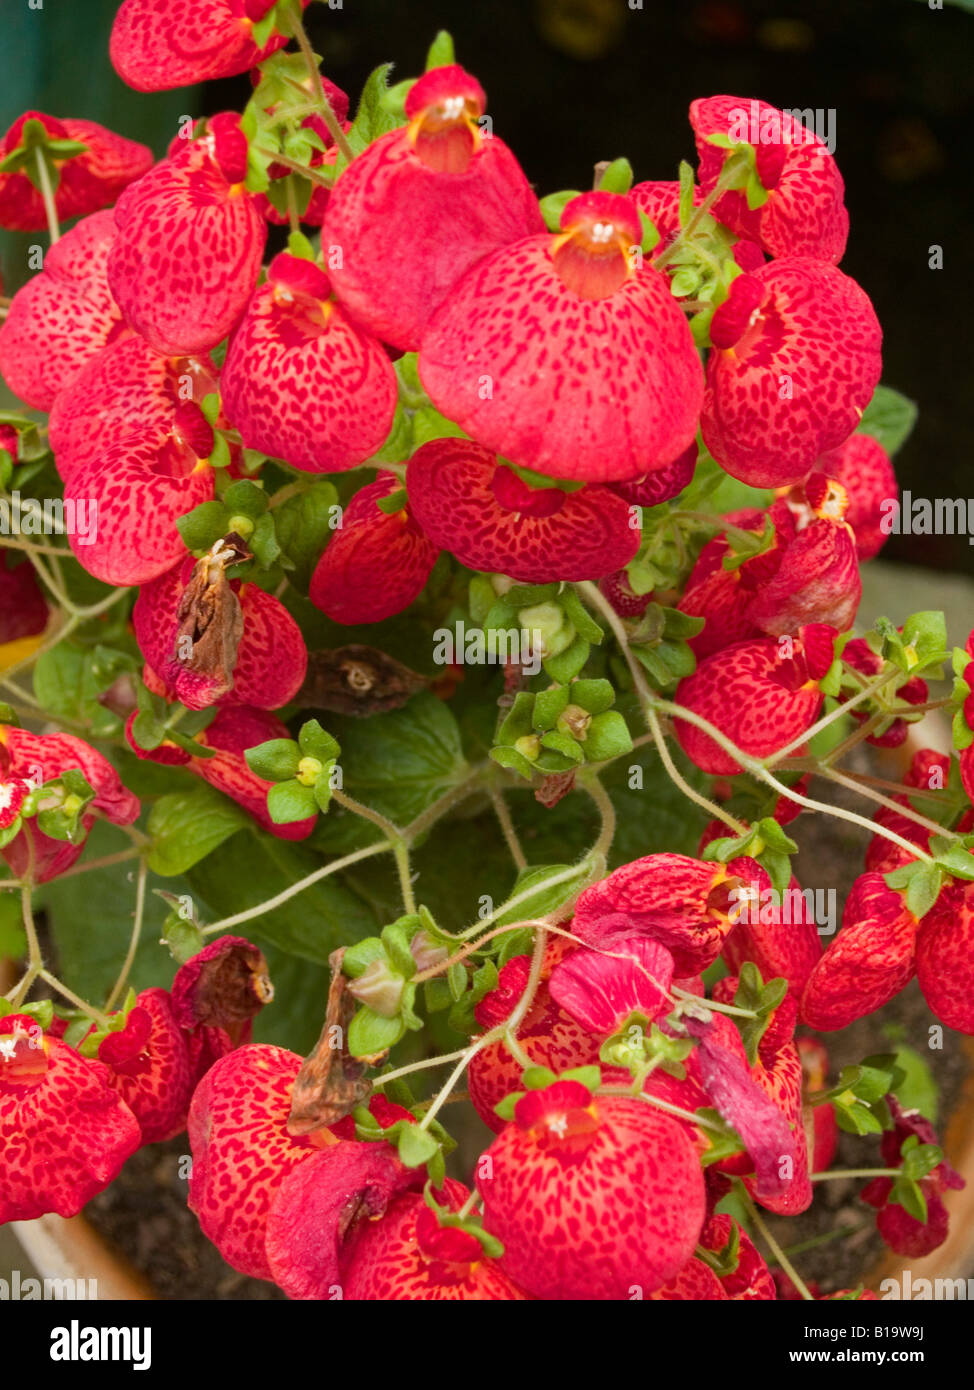 colorful red Calceolaria flowers Lady Slippers Stock Photo